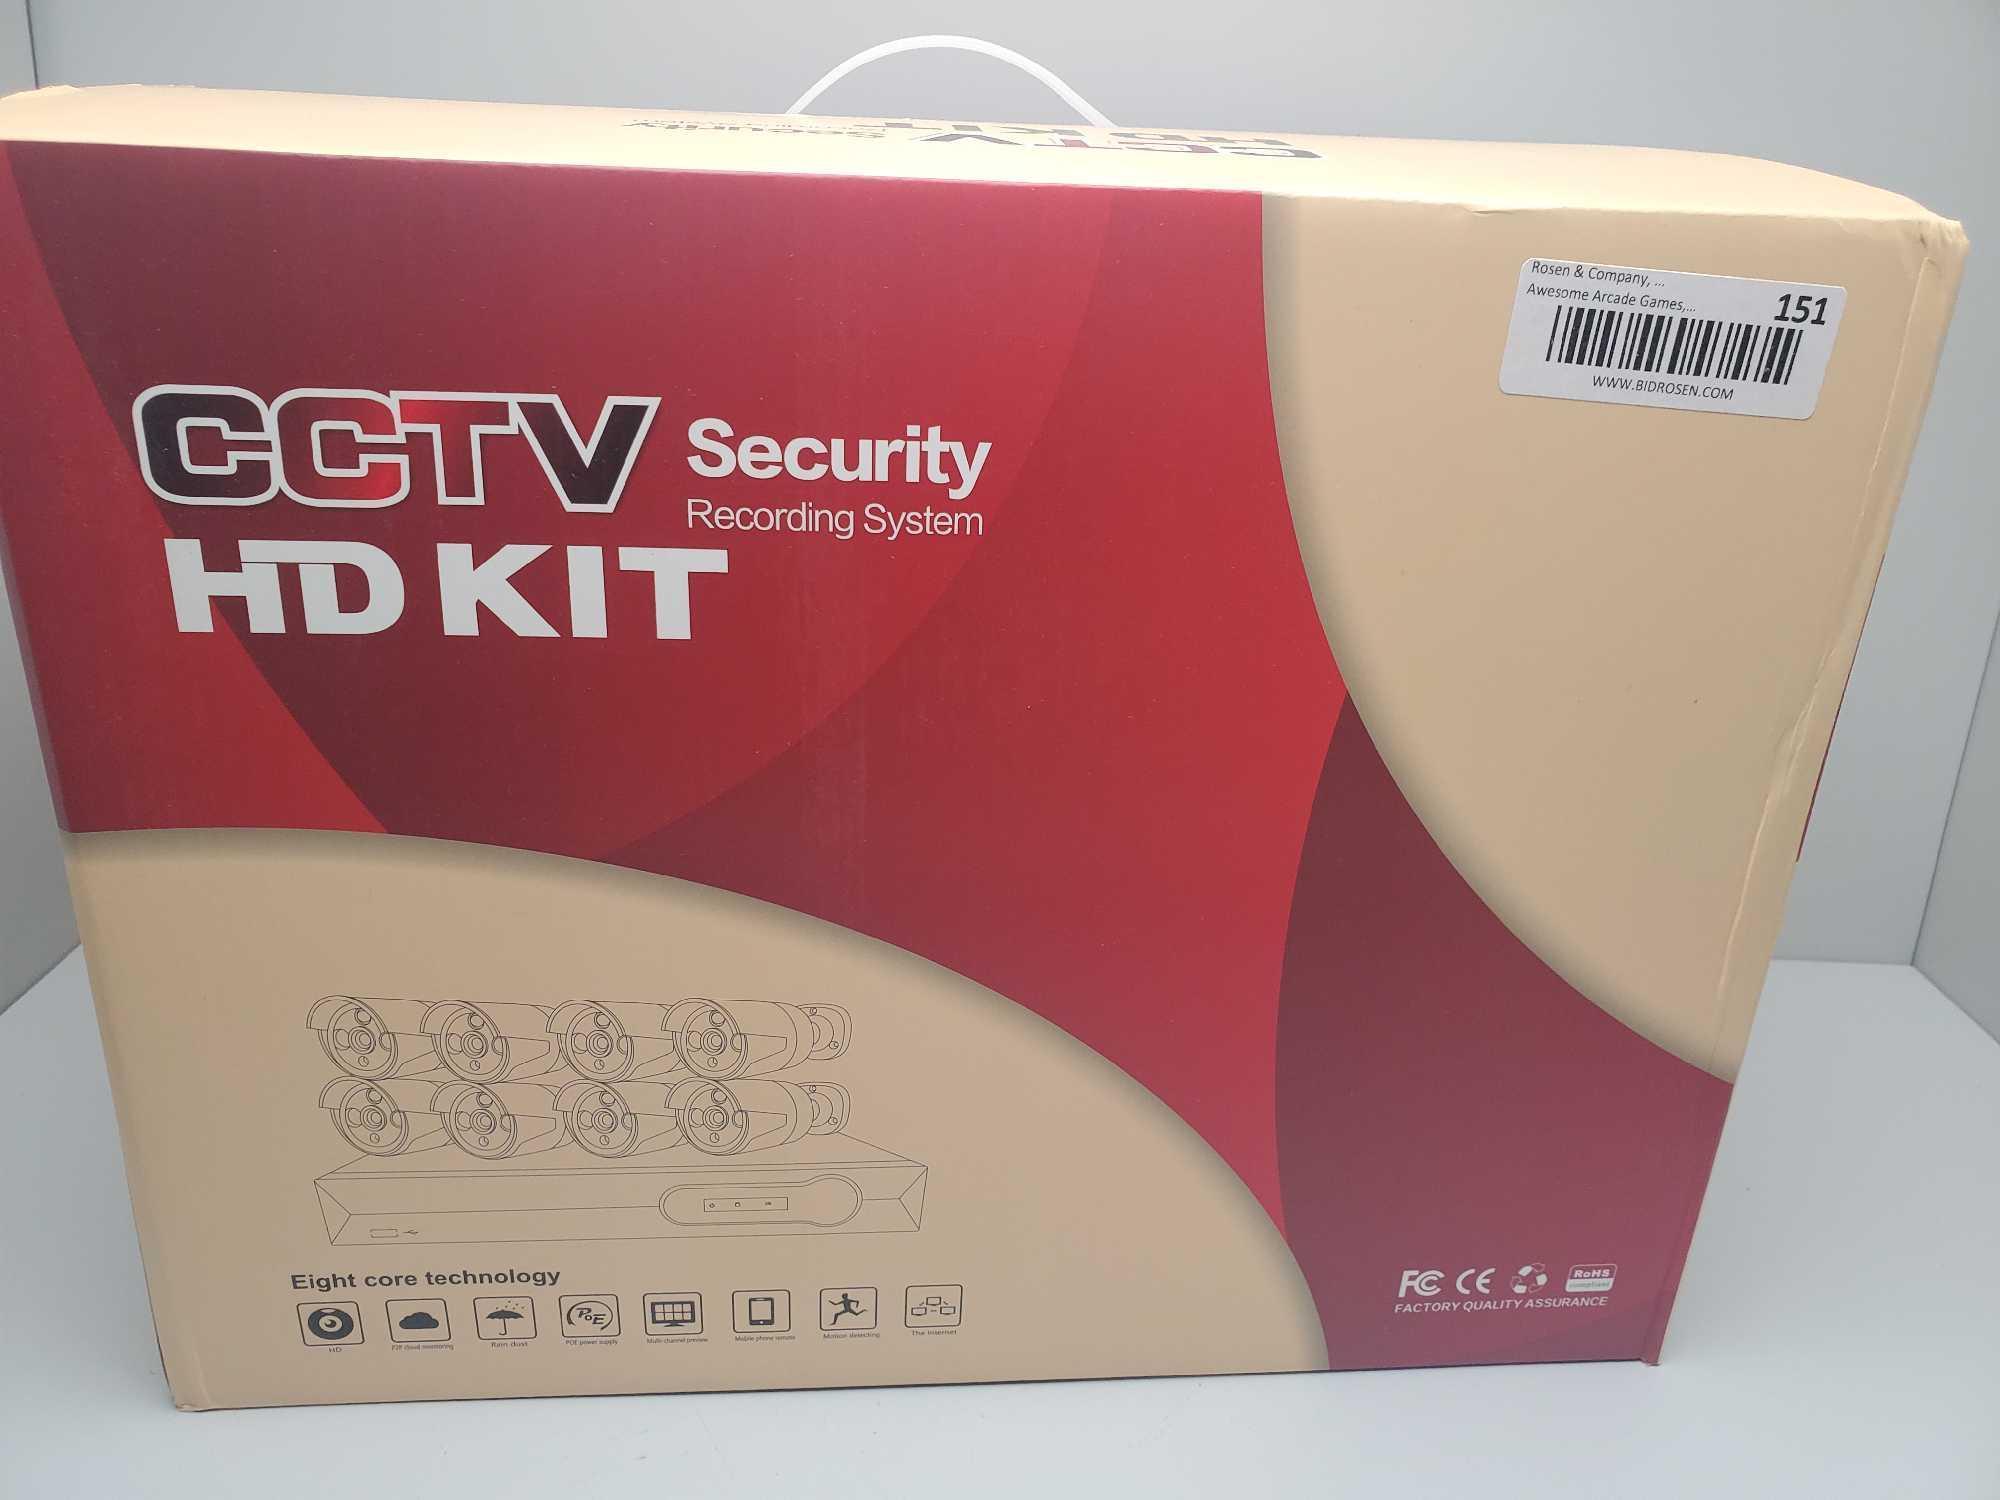 New CCTV Security Recording System HD Kit.